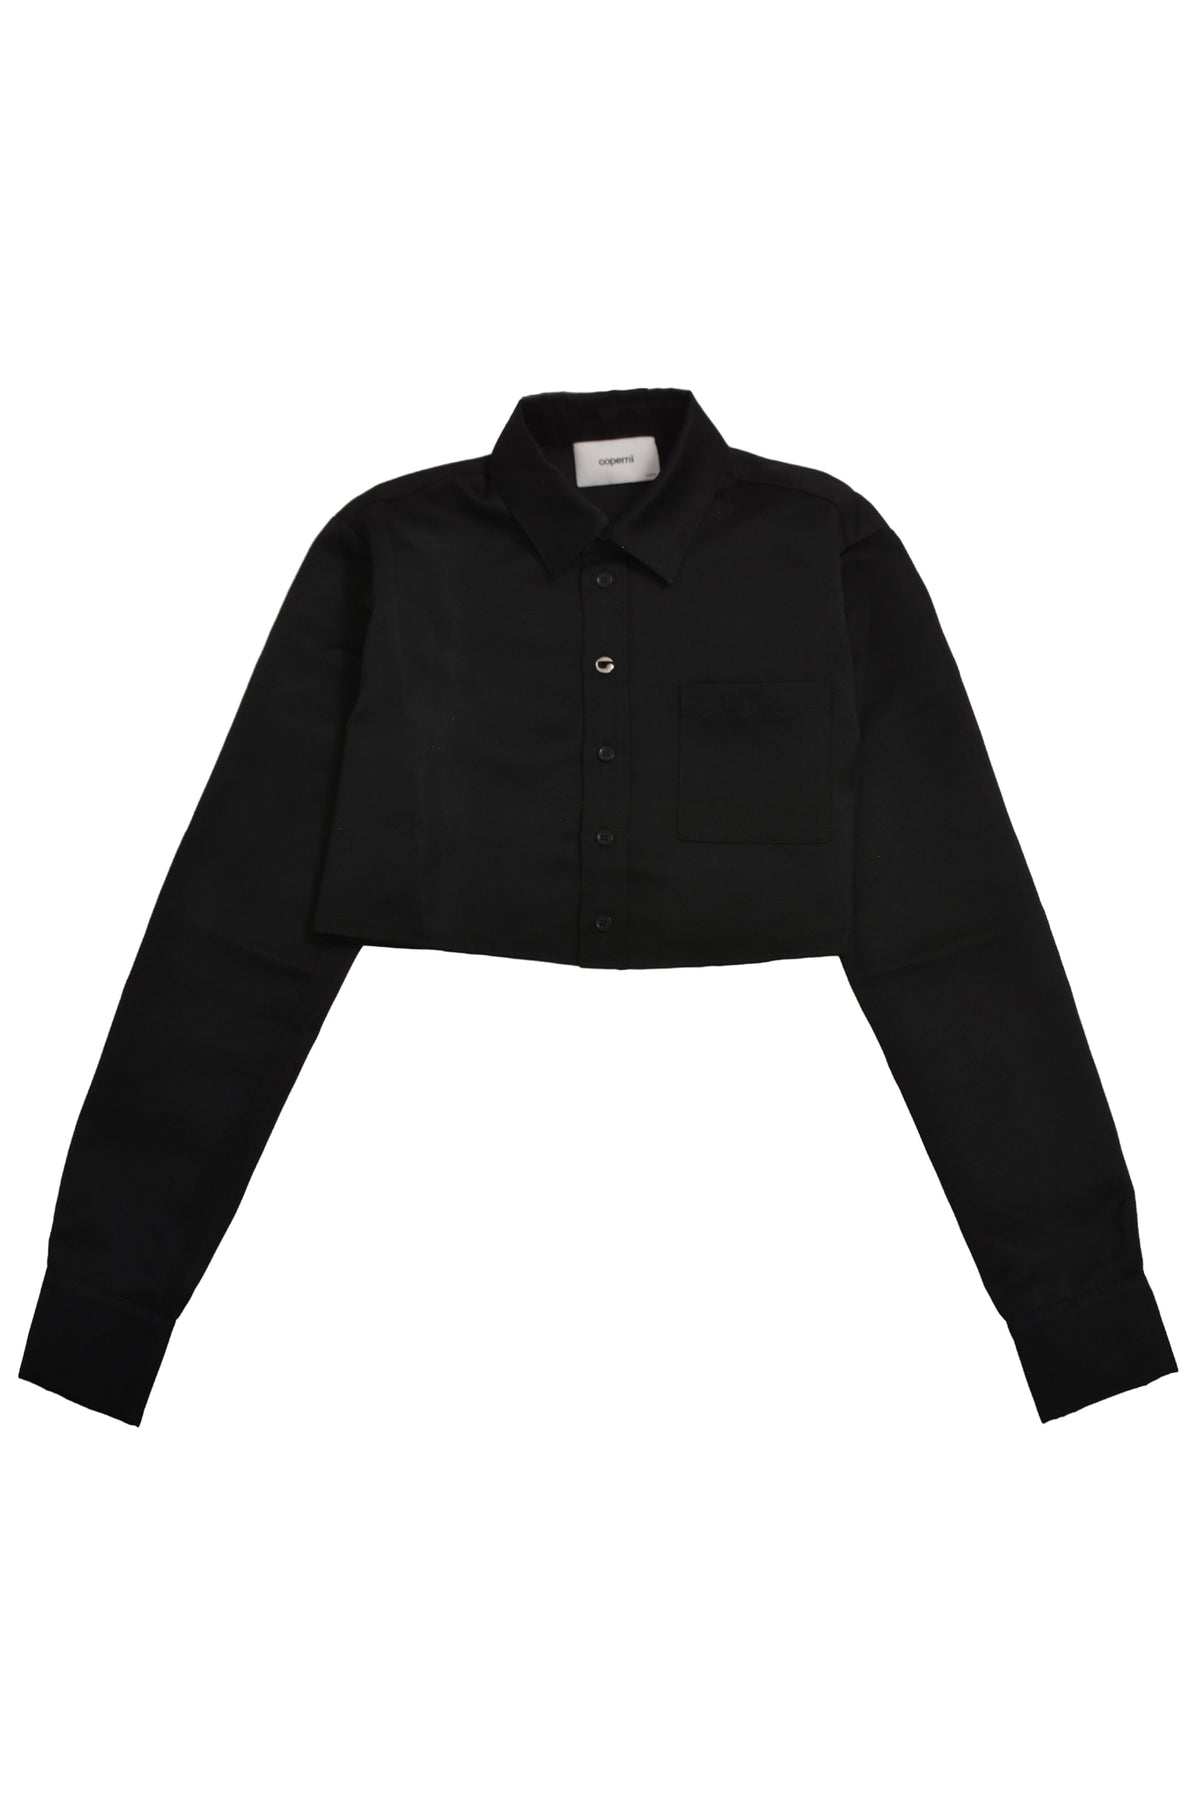 CROPPED SHIRT / BLK